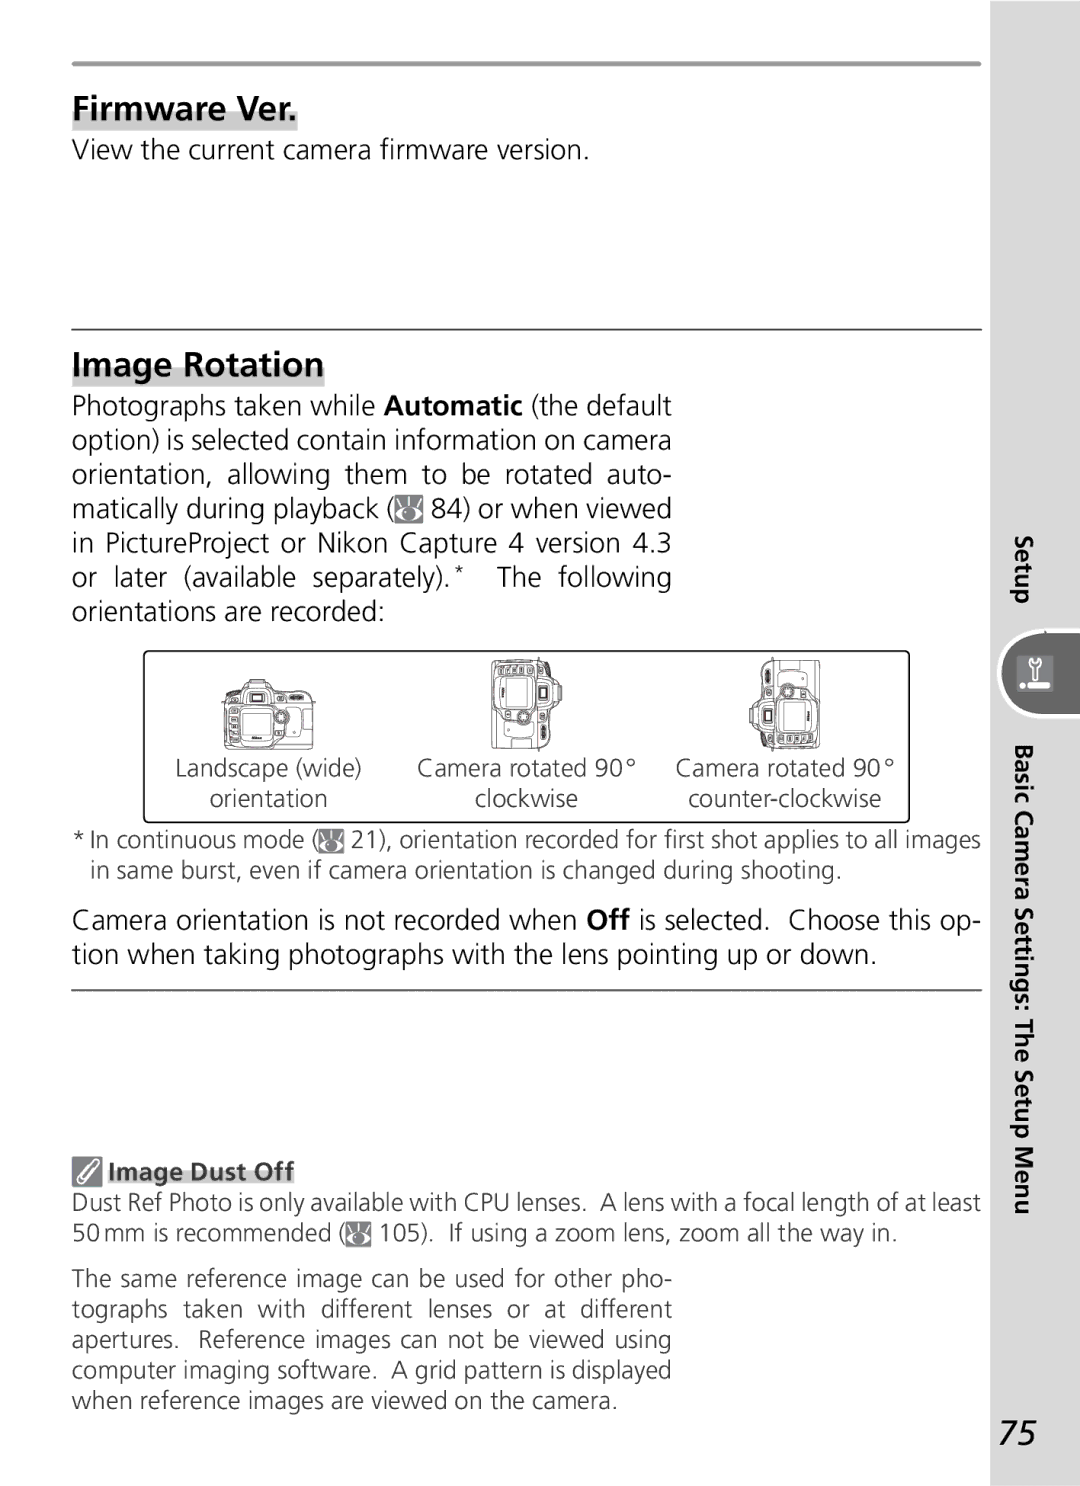 Nikon D50 manual Firmware Ver, Image Rotation, View the current camera ﬁrmware version, Image Dust Off 